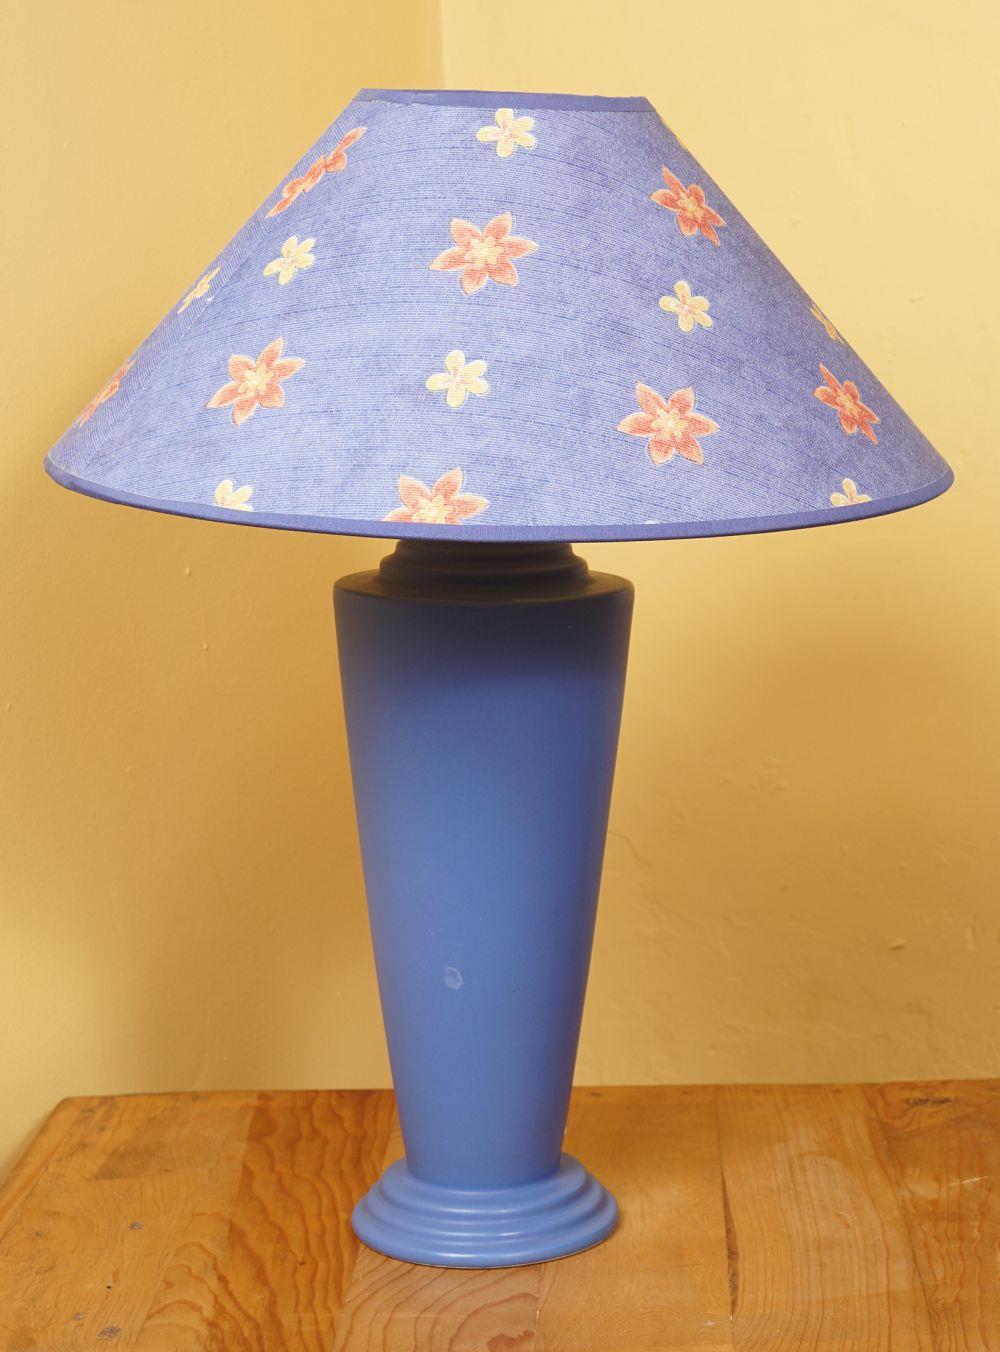 ART POTTERY TABLE LAMP - Image 2 of 2